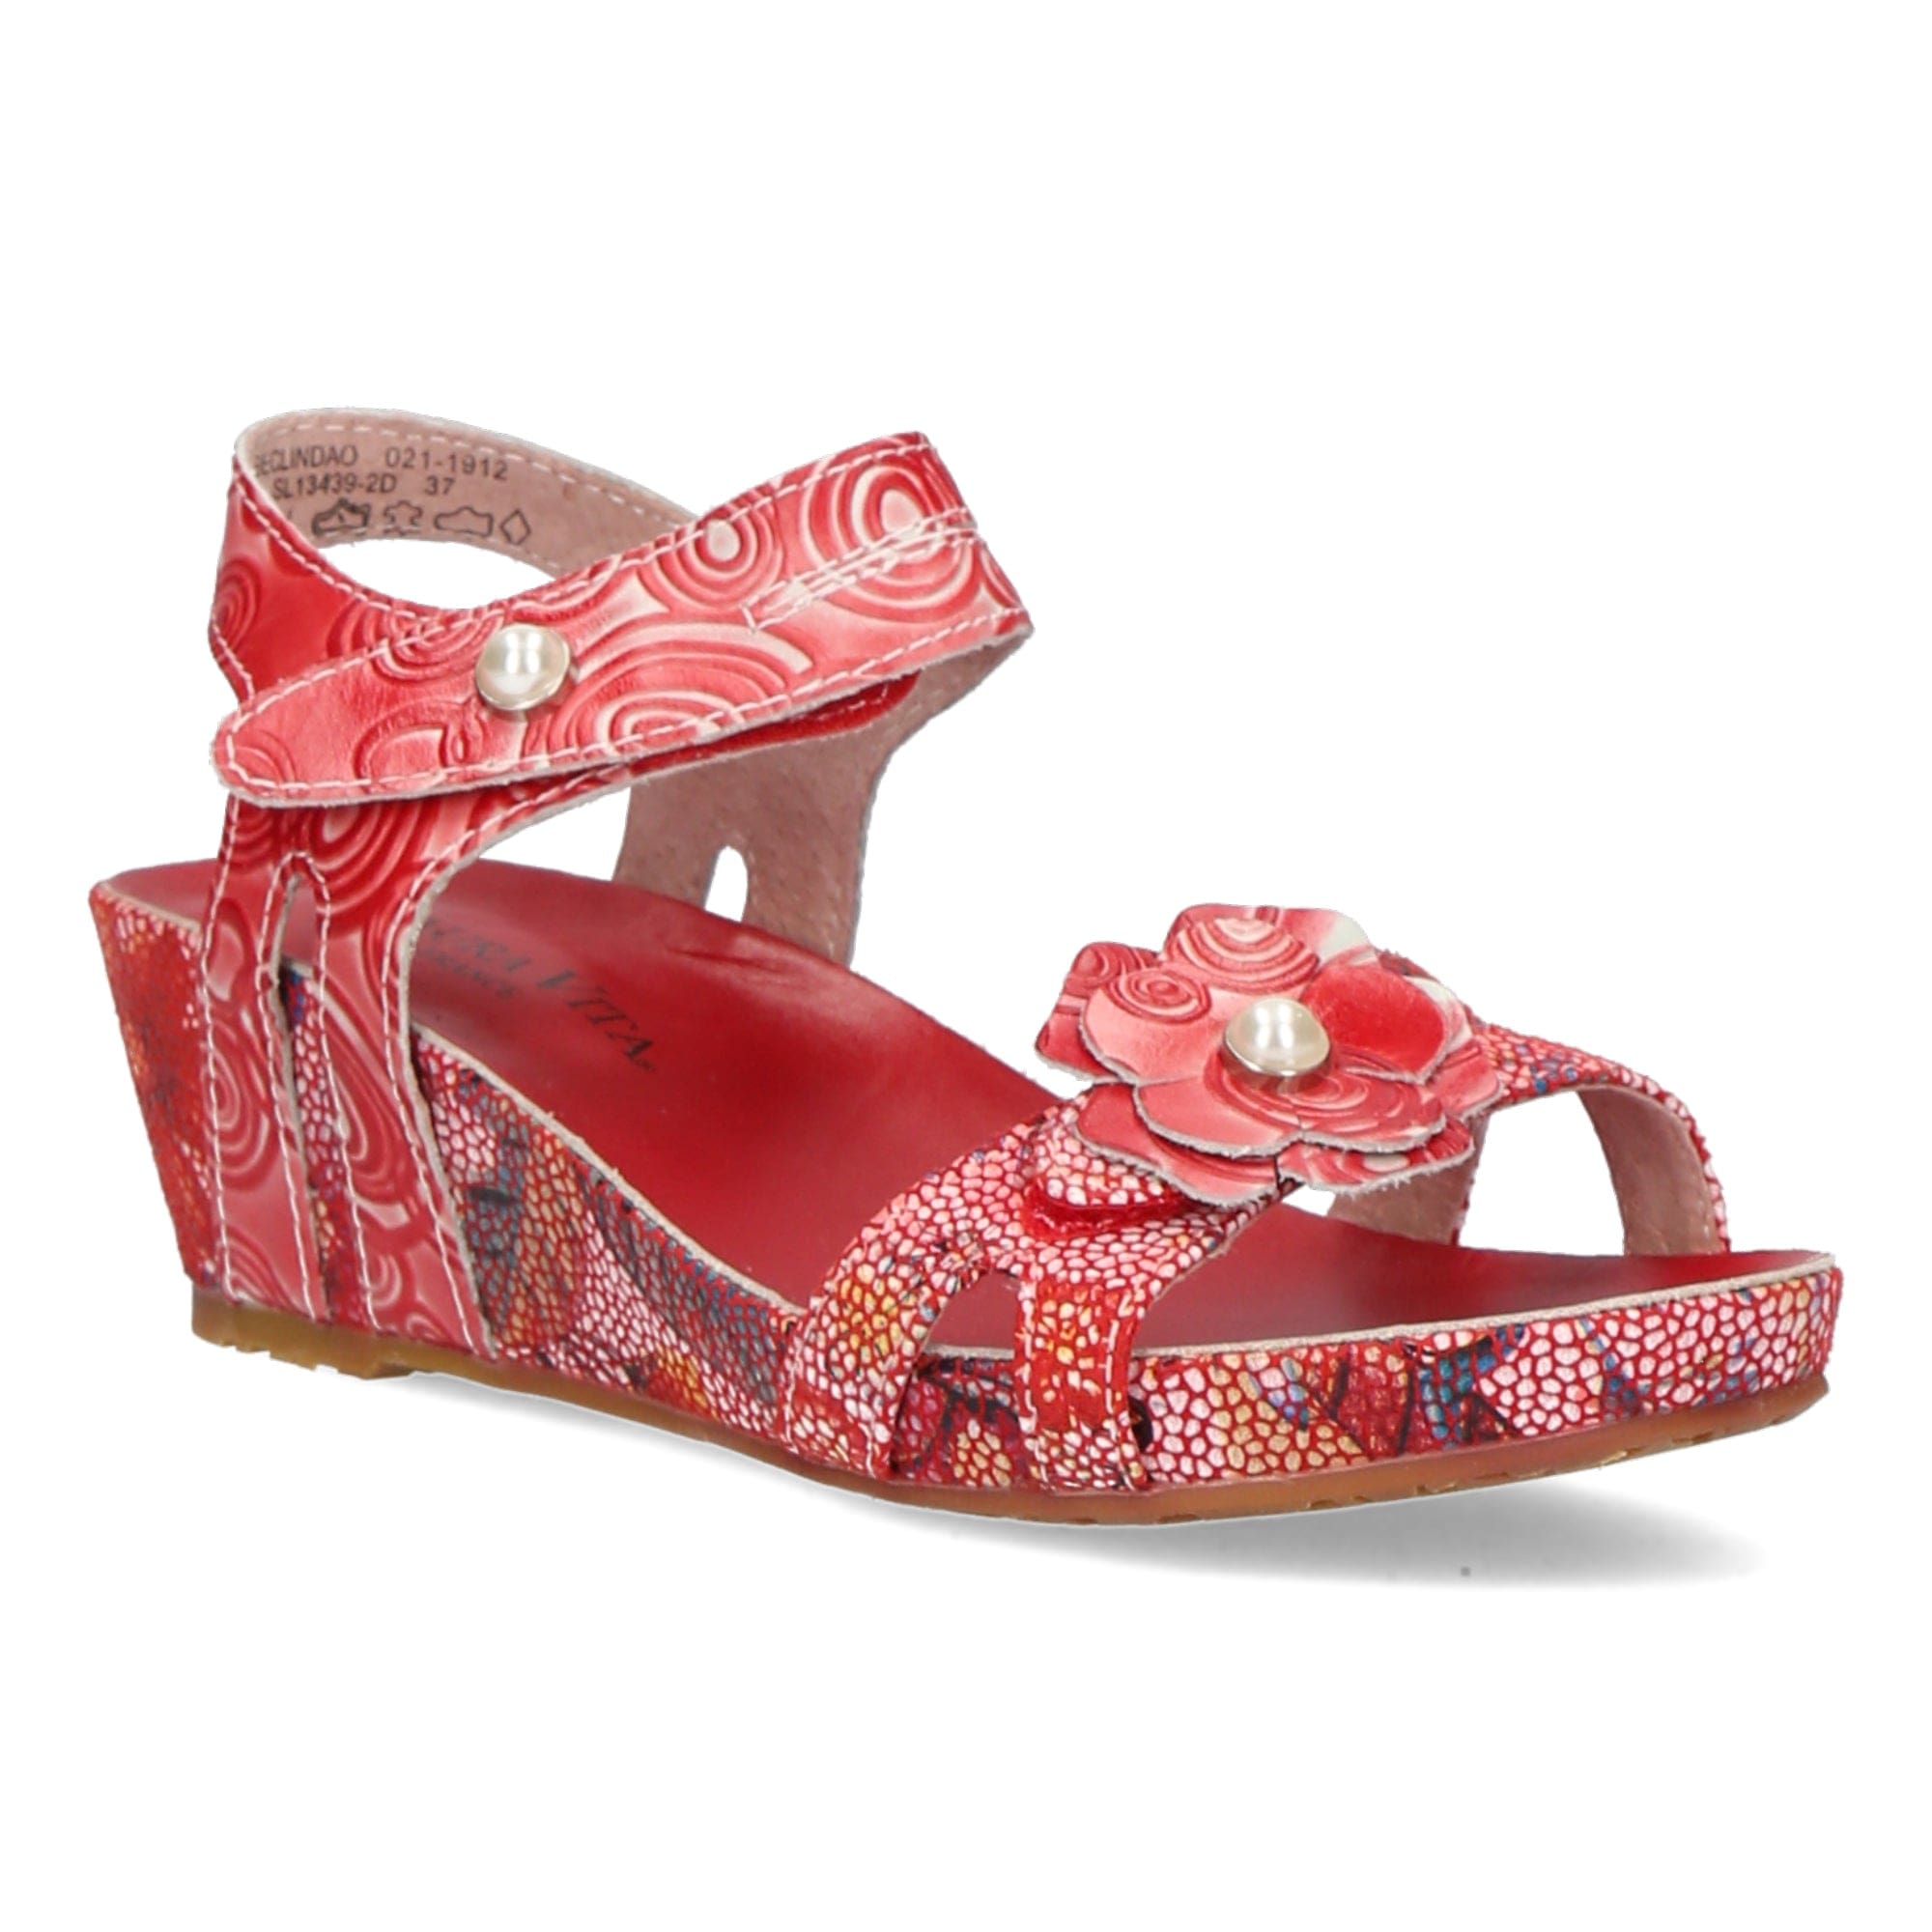 Chaussures BECLINDAO 021 - Sandale